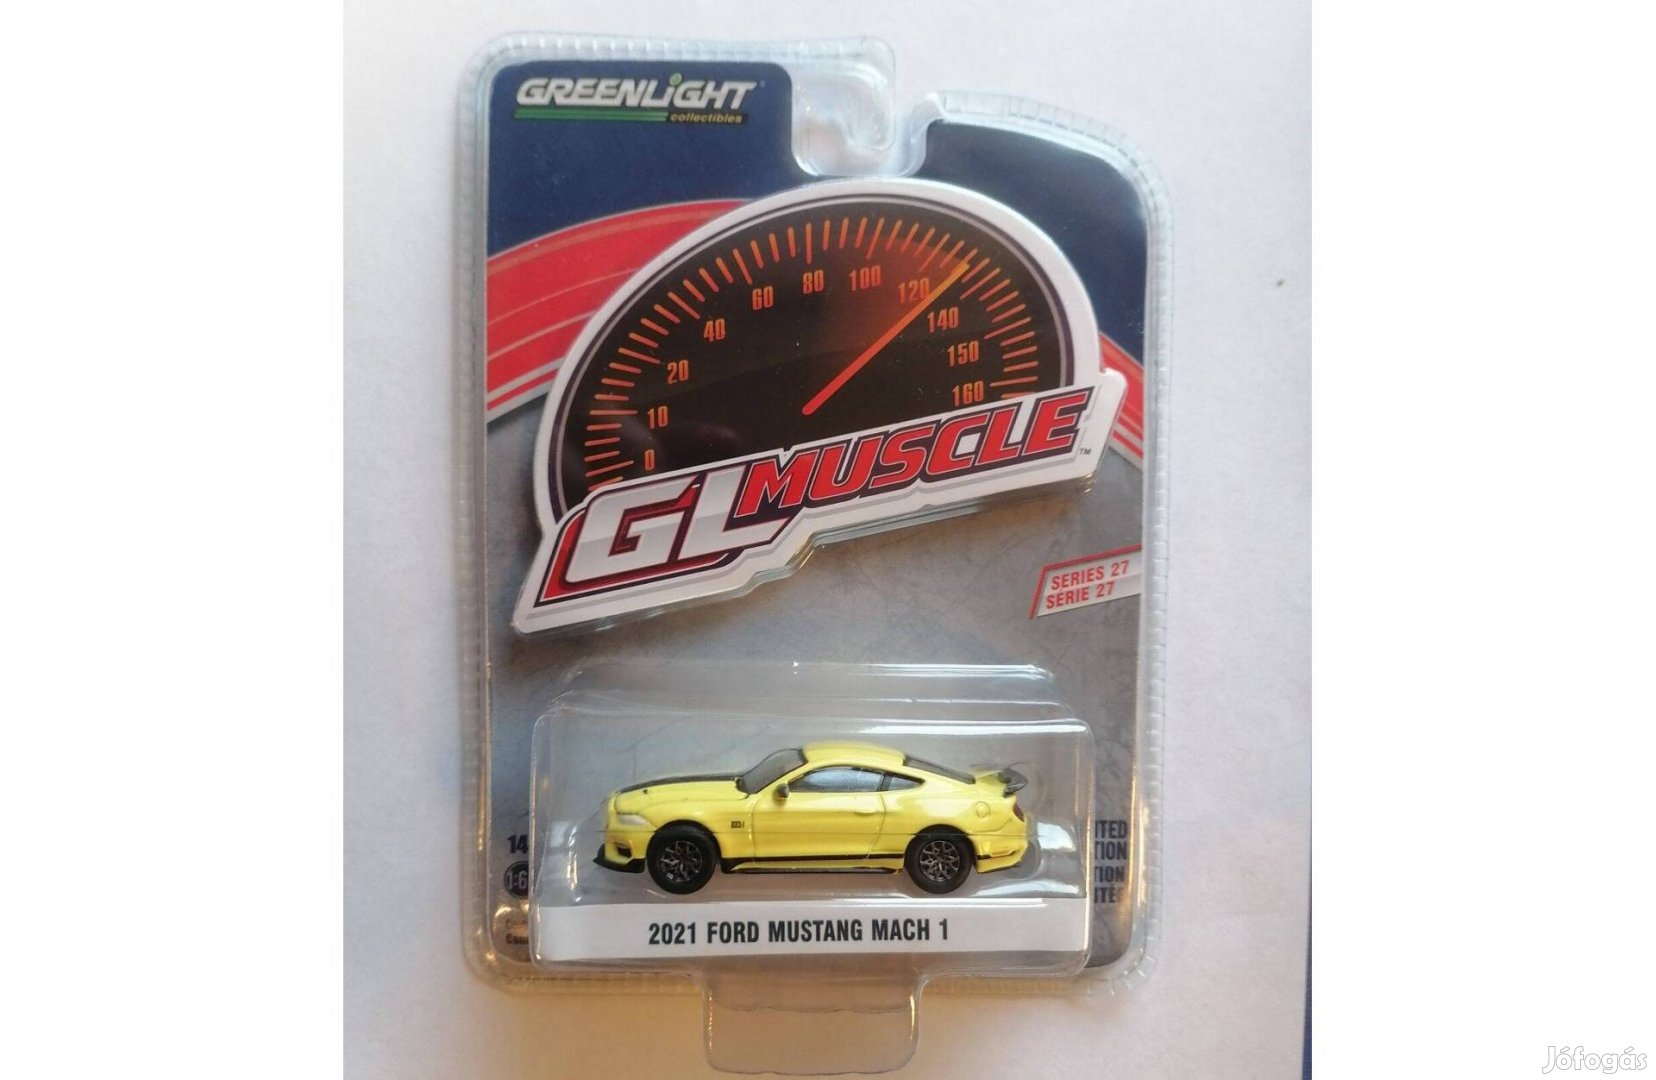 Greenlight 2021 ford mustang mach 1 muscle series 27 grabber yellow